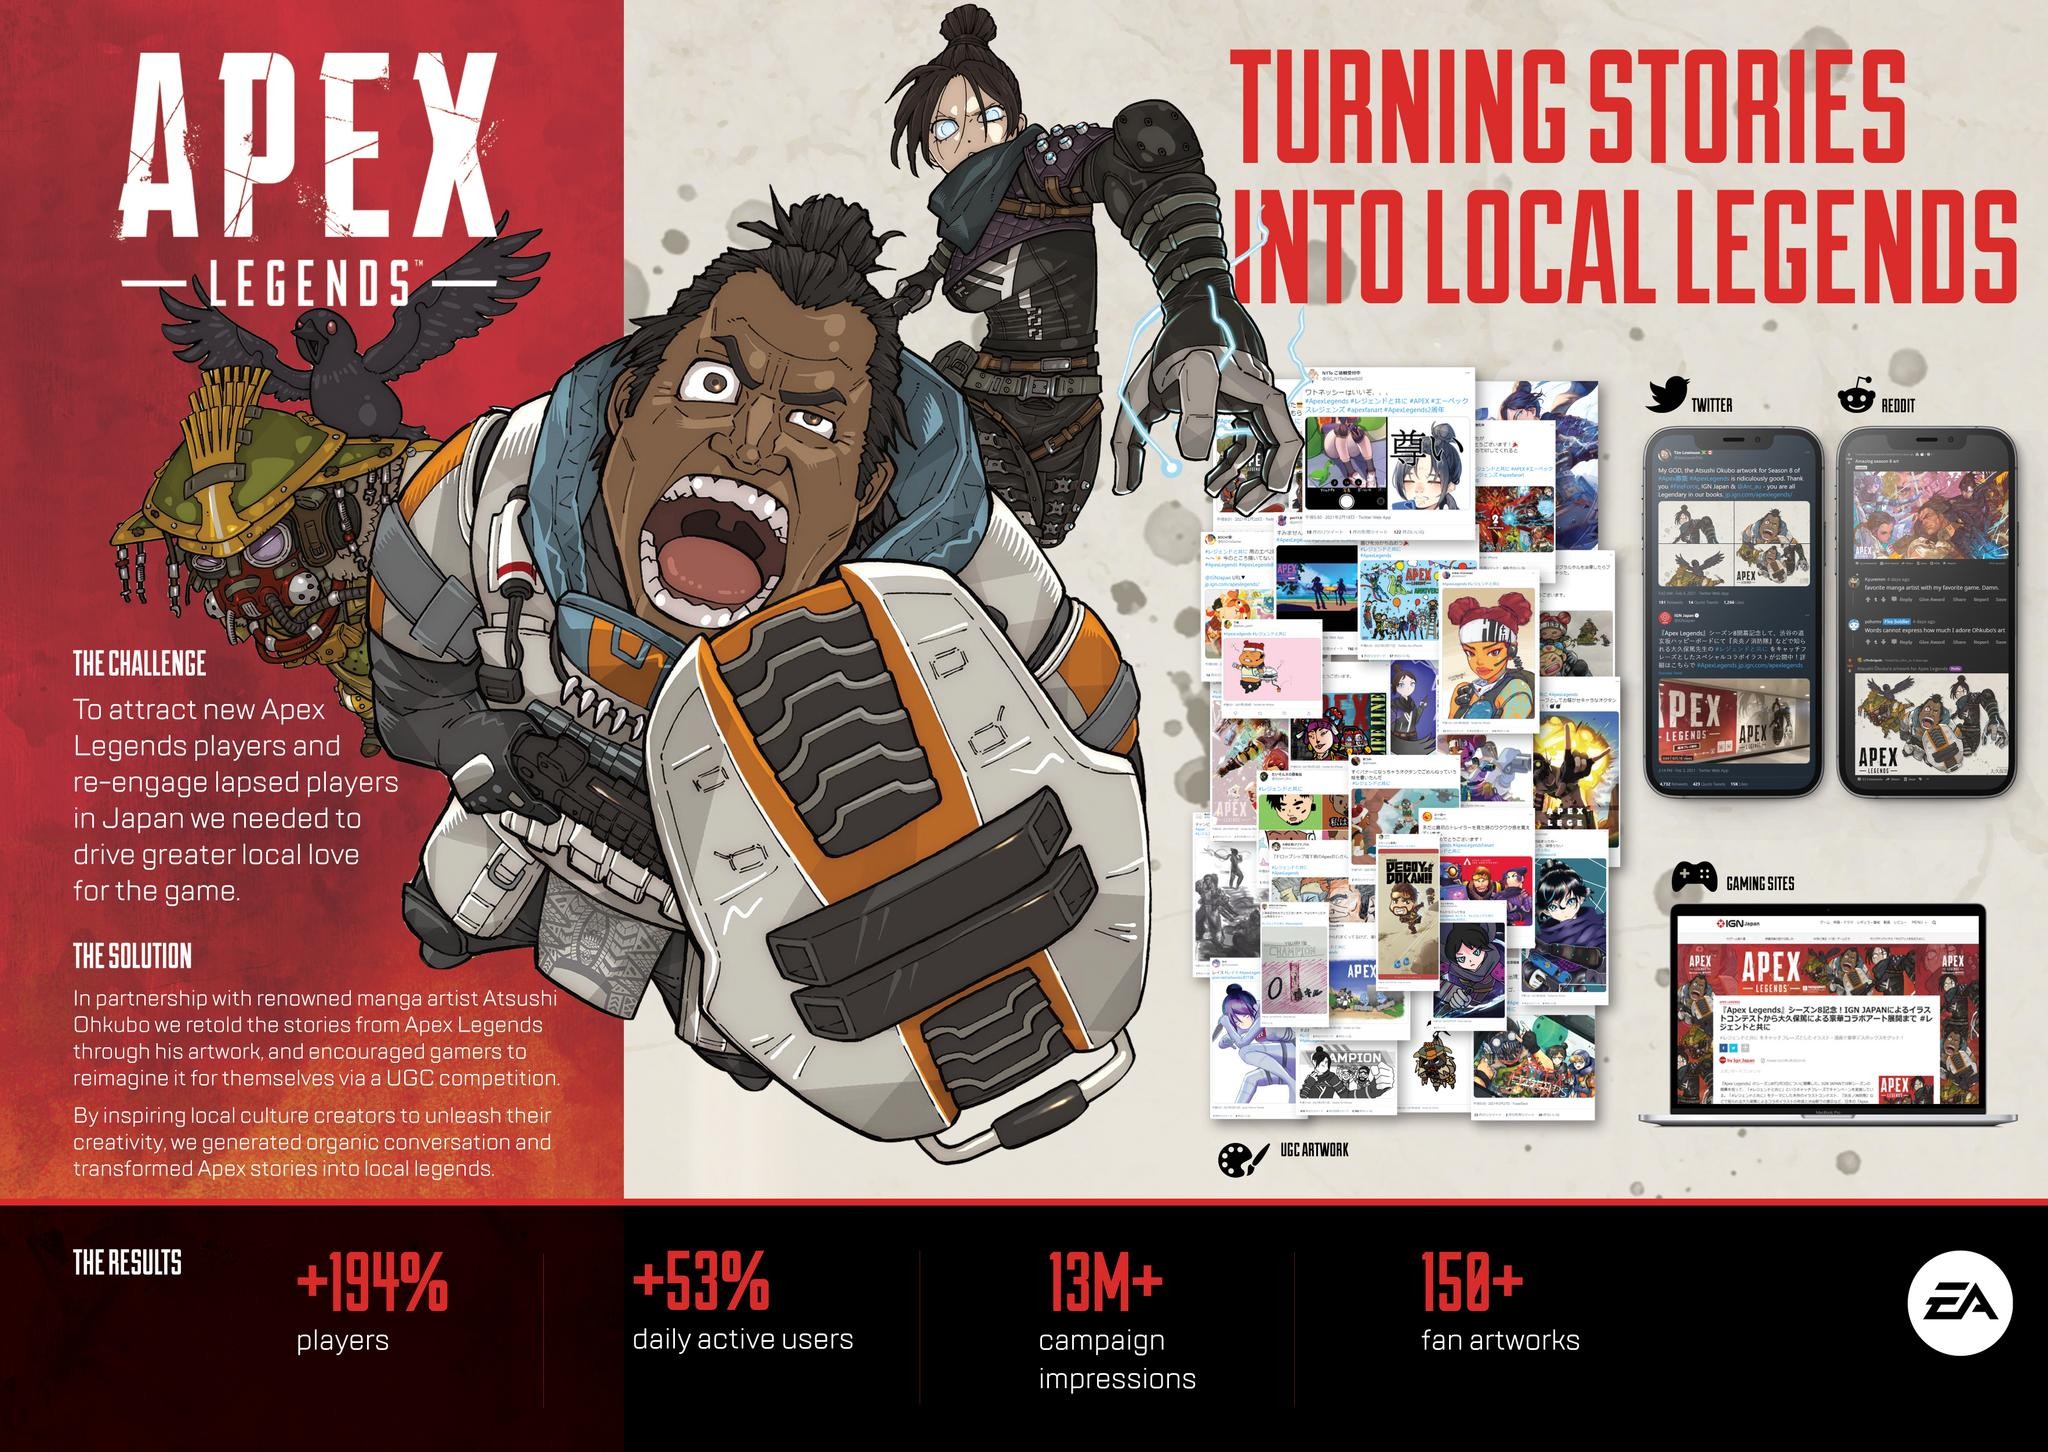 Apex Legends: Turning Stories into Local Legends